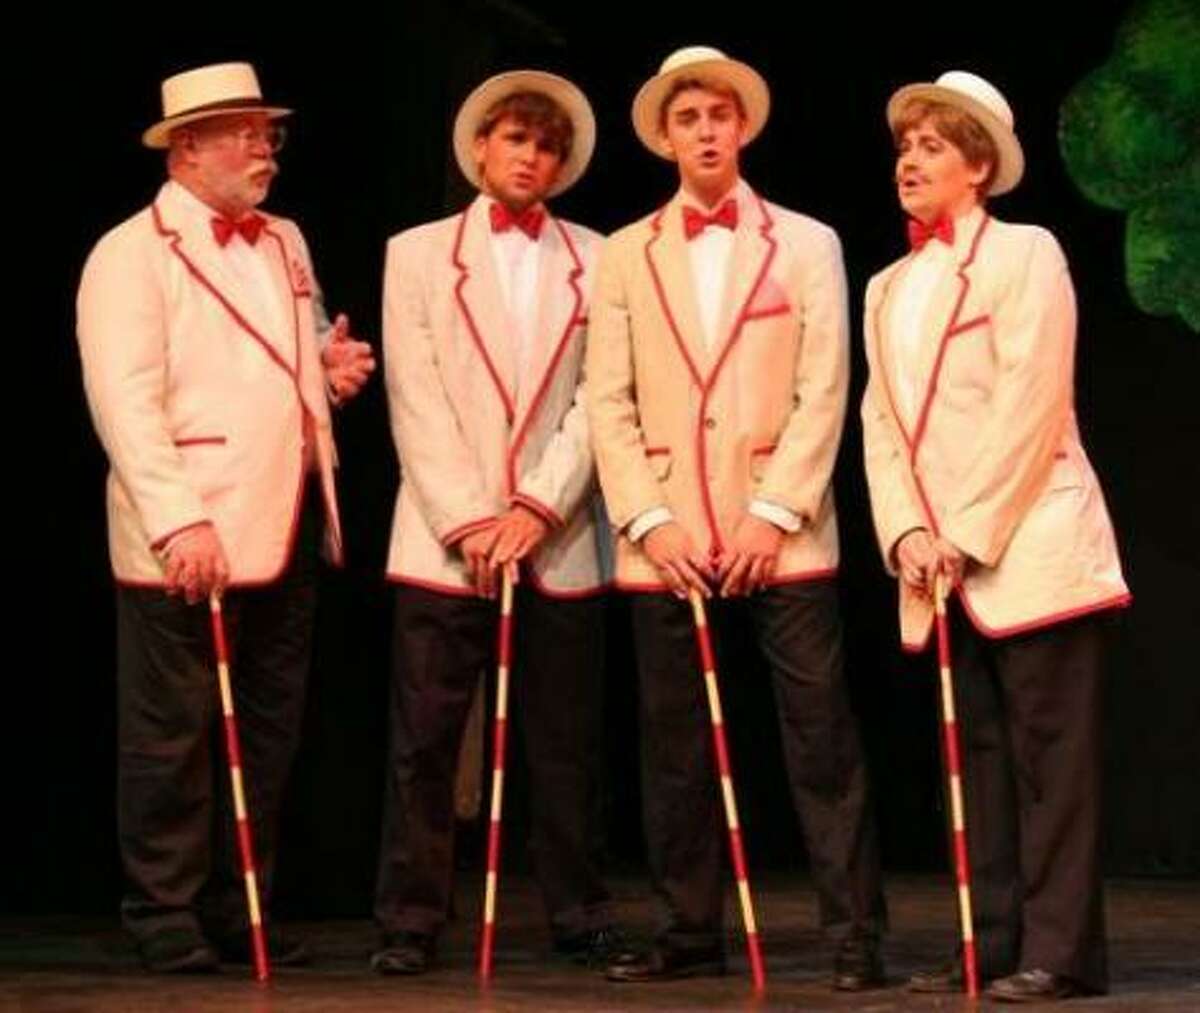 Shaun Michael McCown, left, Jeff van Wageningen, Justin White and Kristi Blair are part of The Music Man cast, which is playing at The Country Playhouse through Saturday. For ticket information and showtimes, call 713-467-4497 or go to www.countryplayhouse.org.